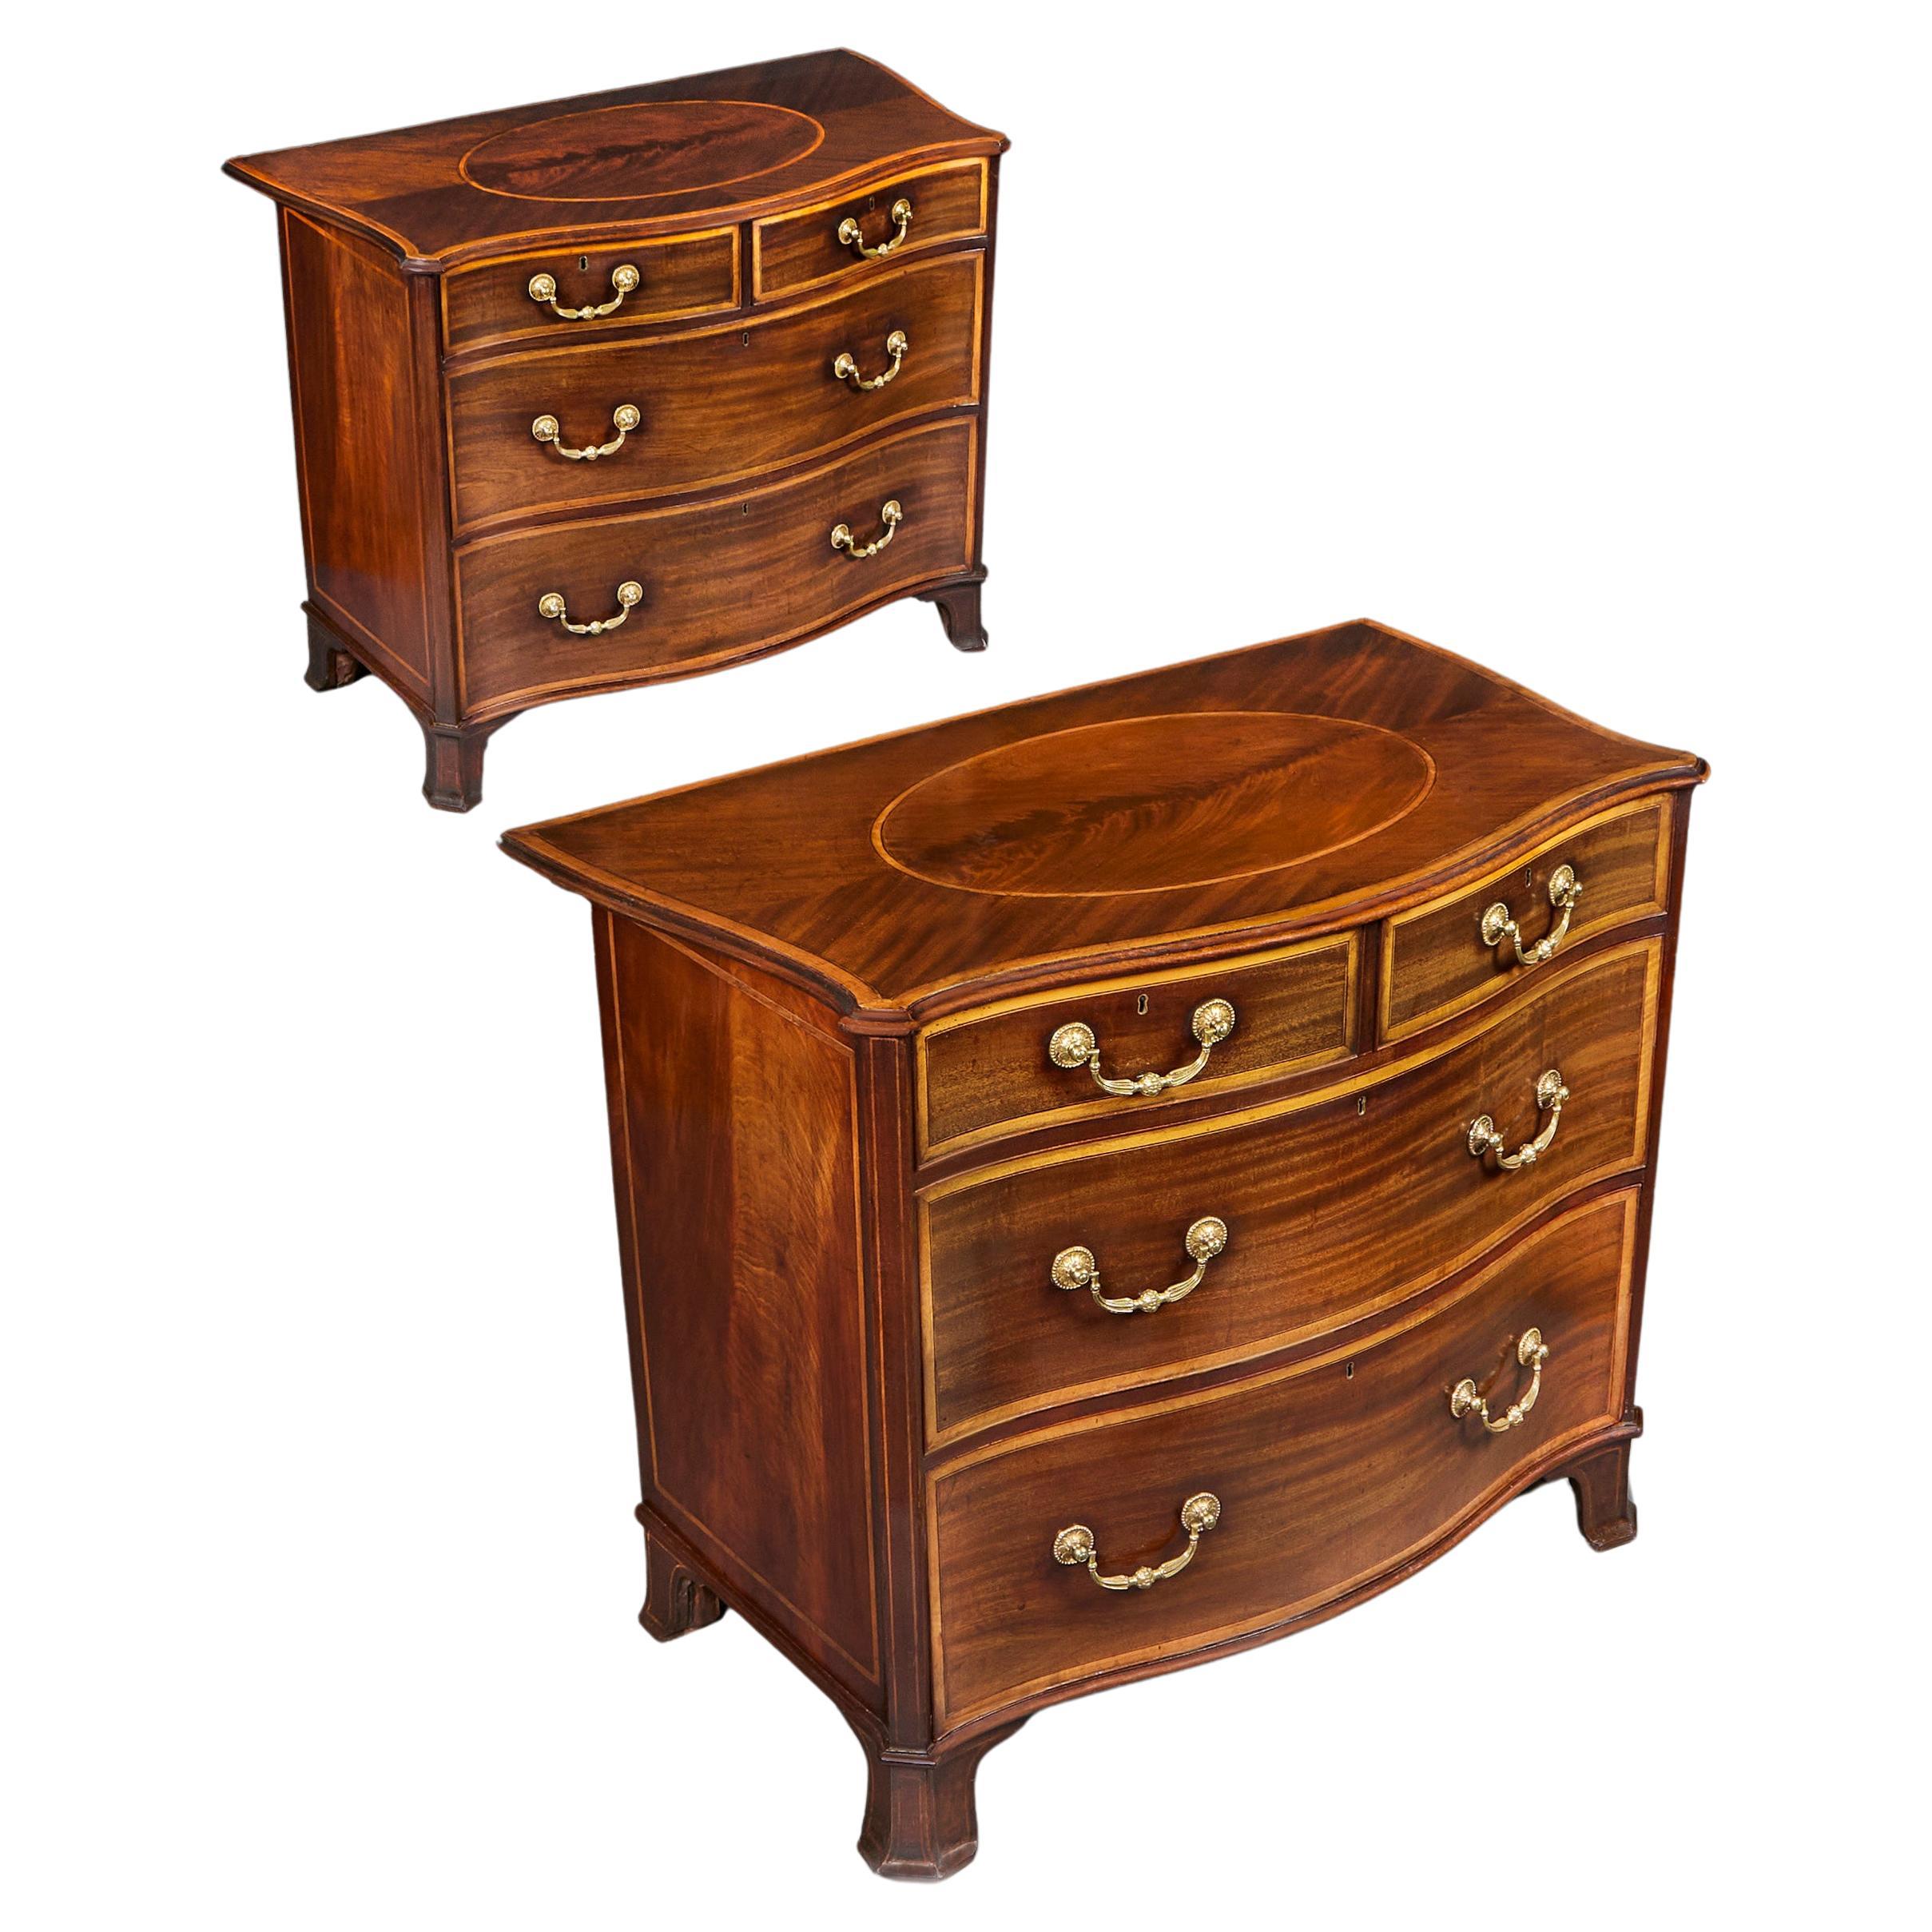 An Important pair of George III Serpentine Commodes